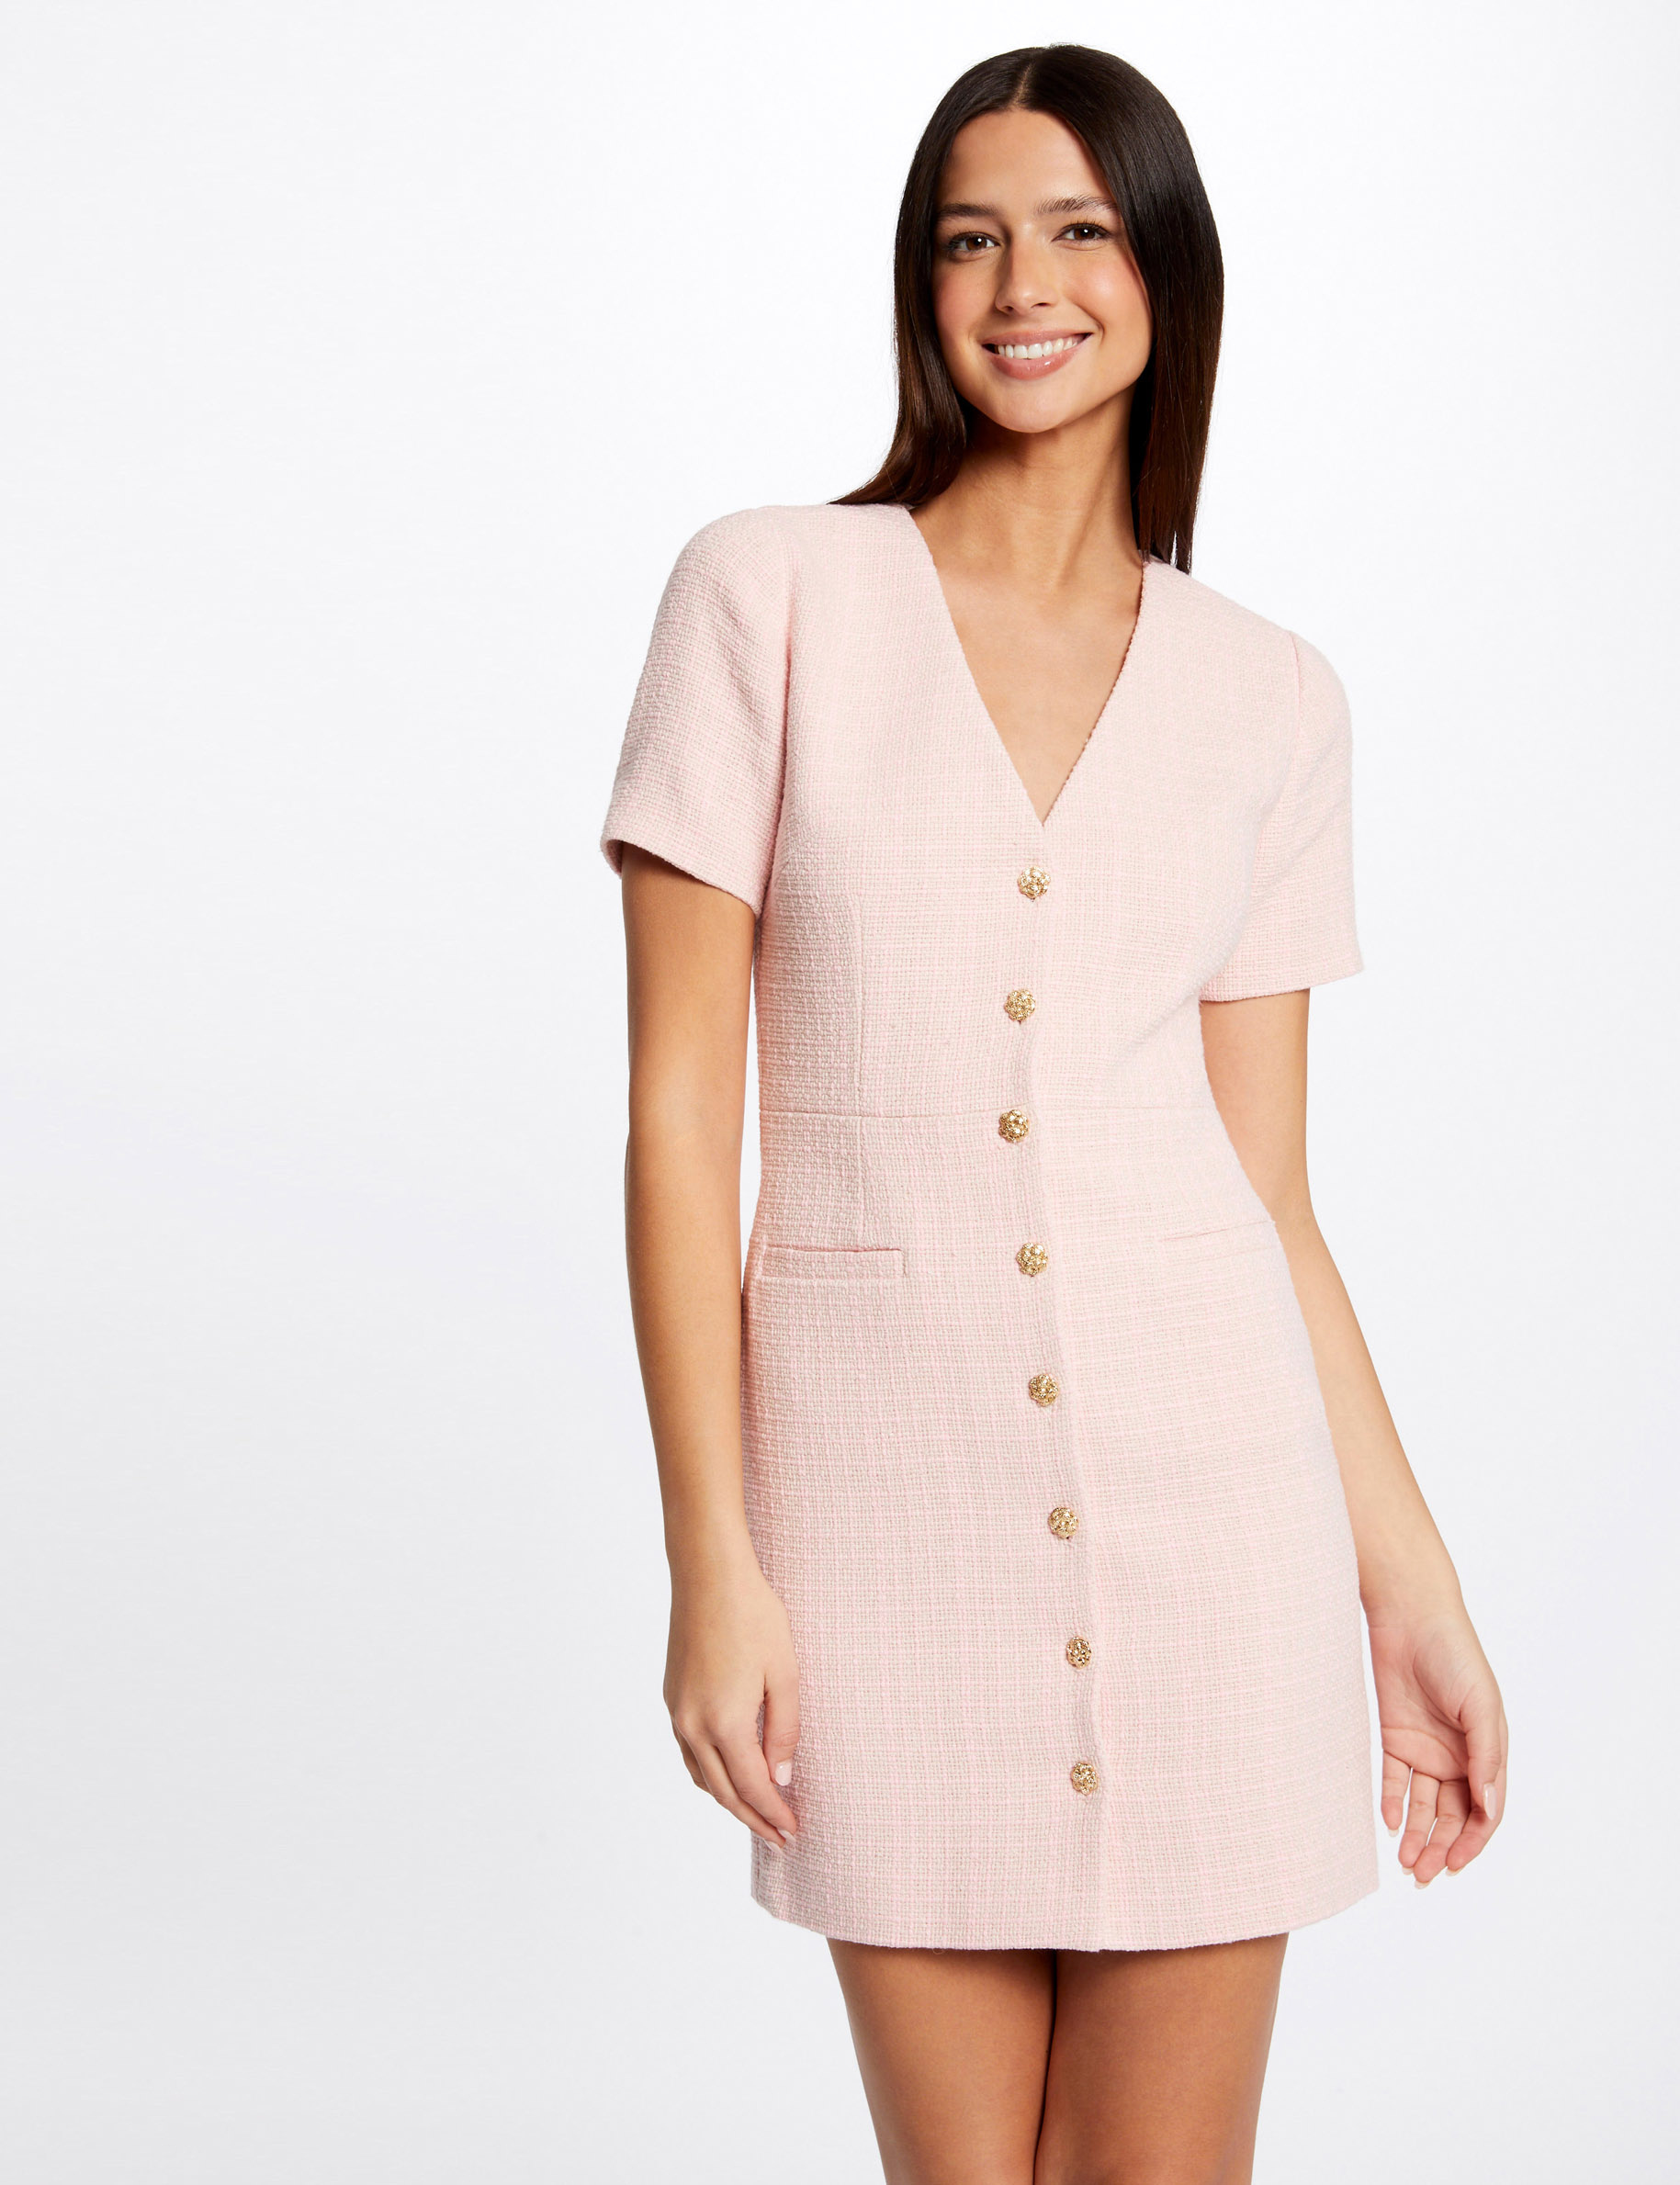 Fitted buttoned dress pink ladies'